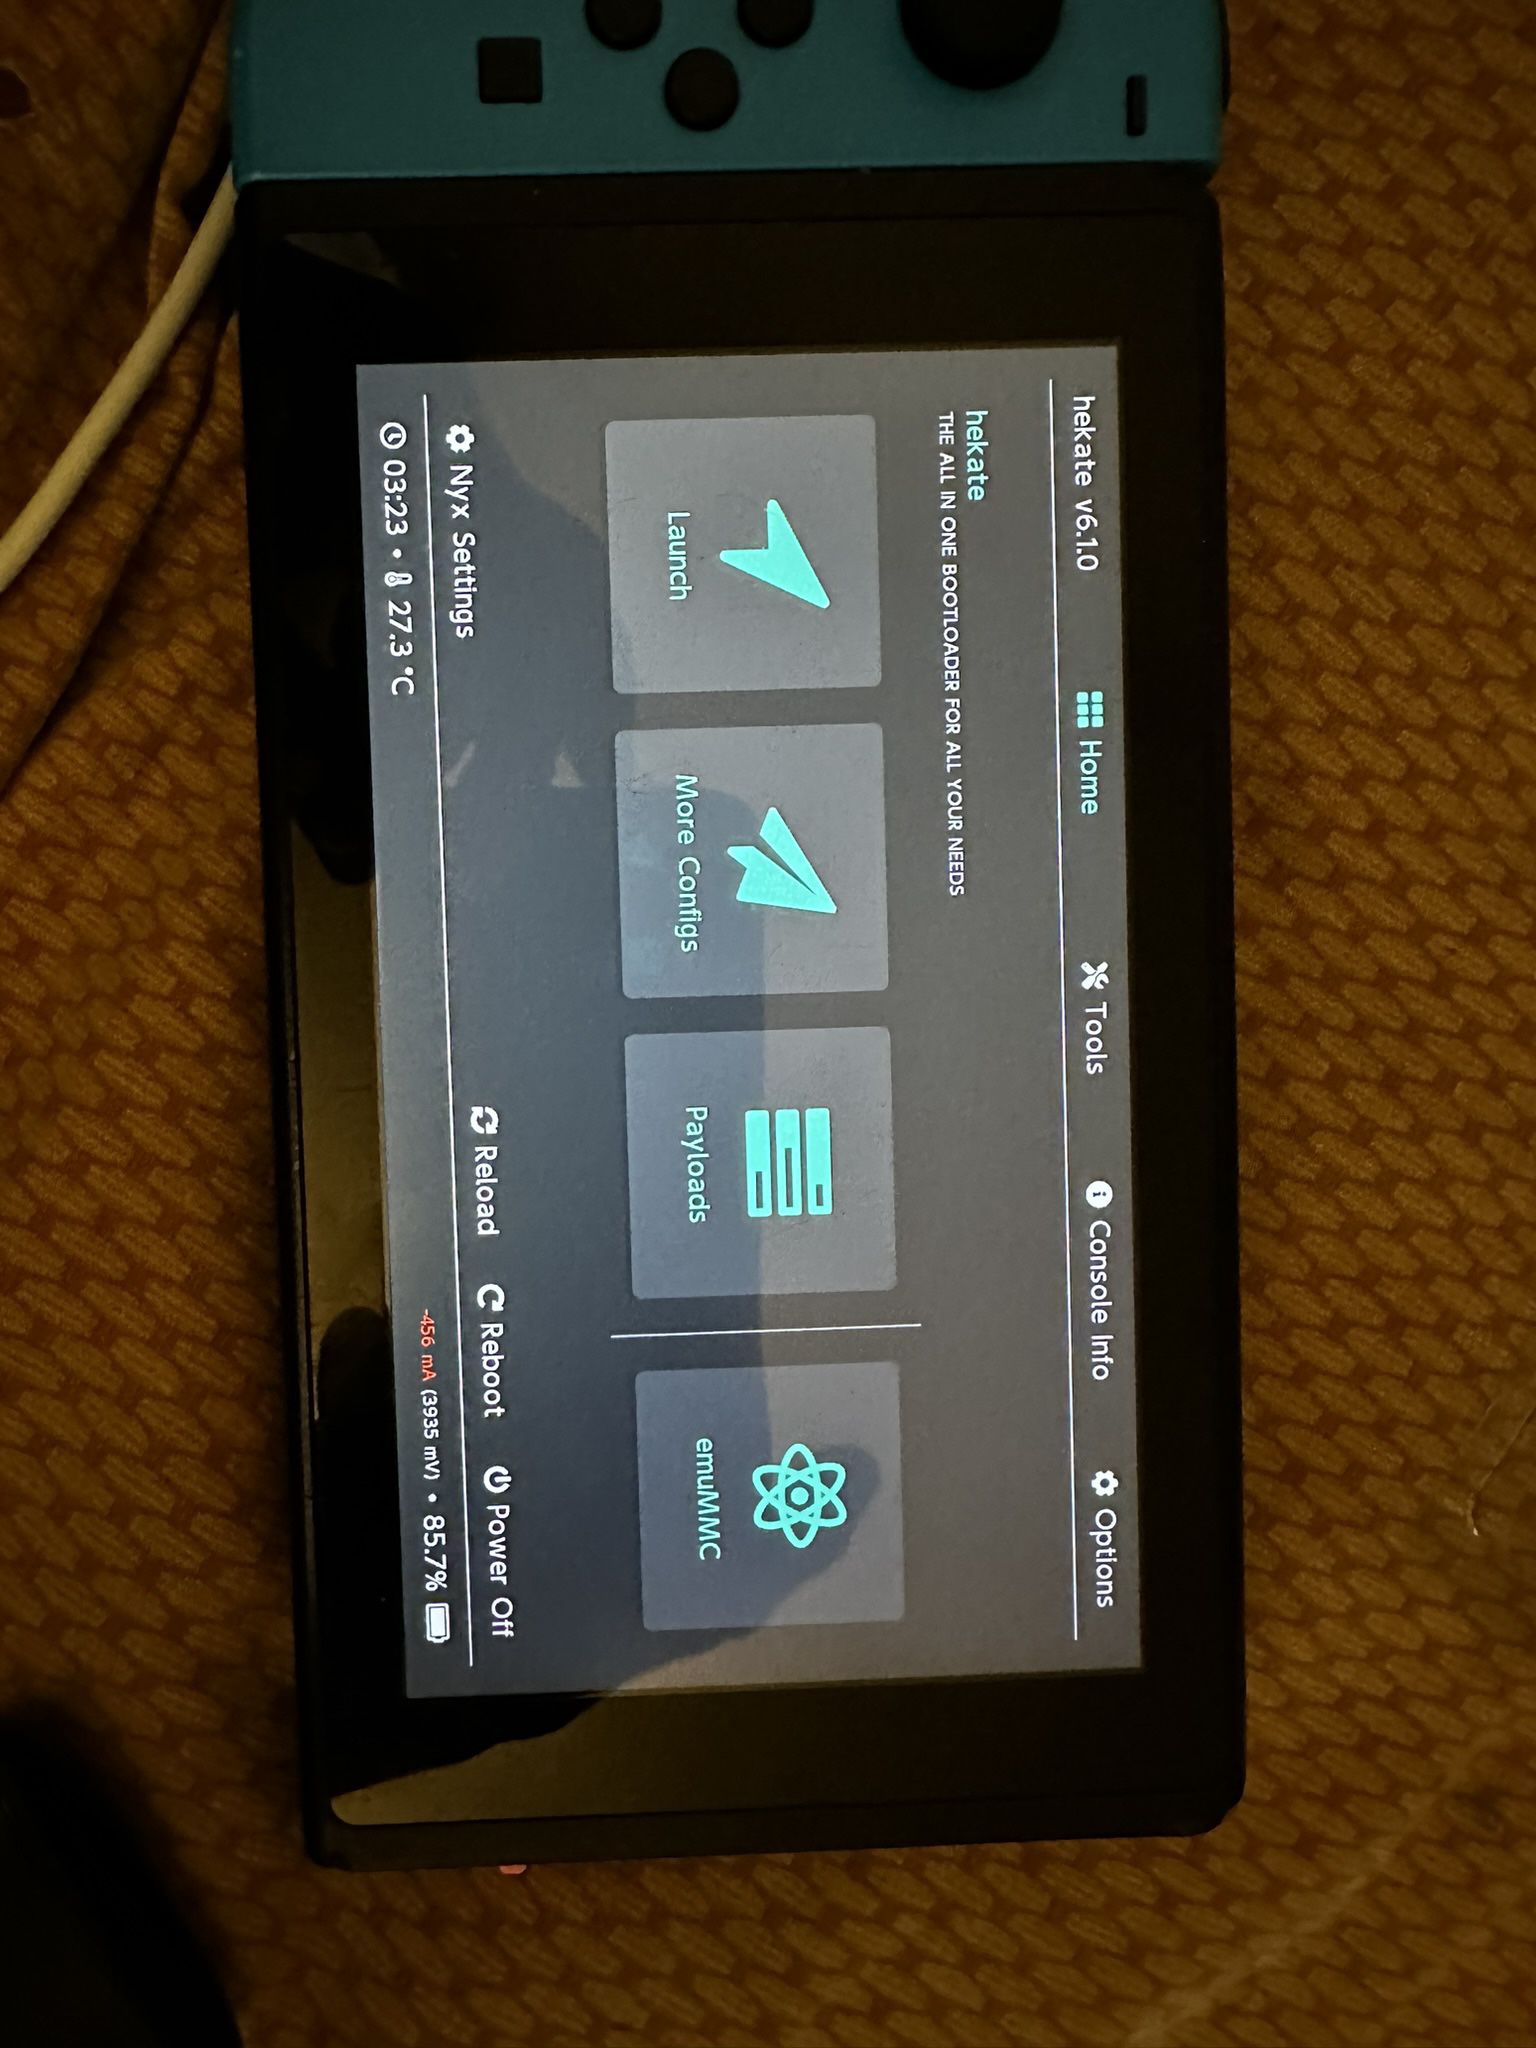 Nintendo Switch Rp2040 Hacked Home brew Atmosphere 